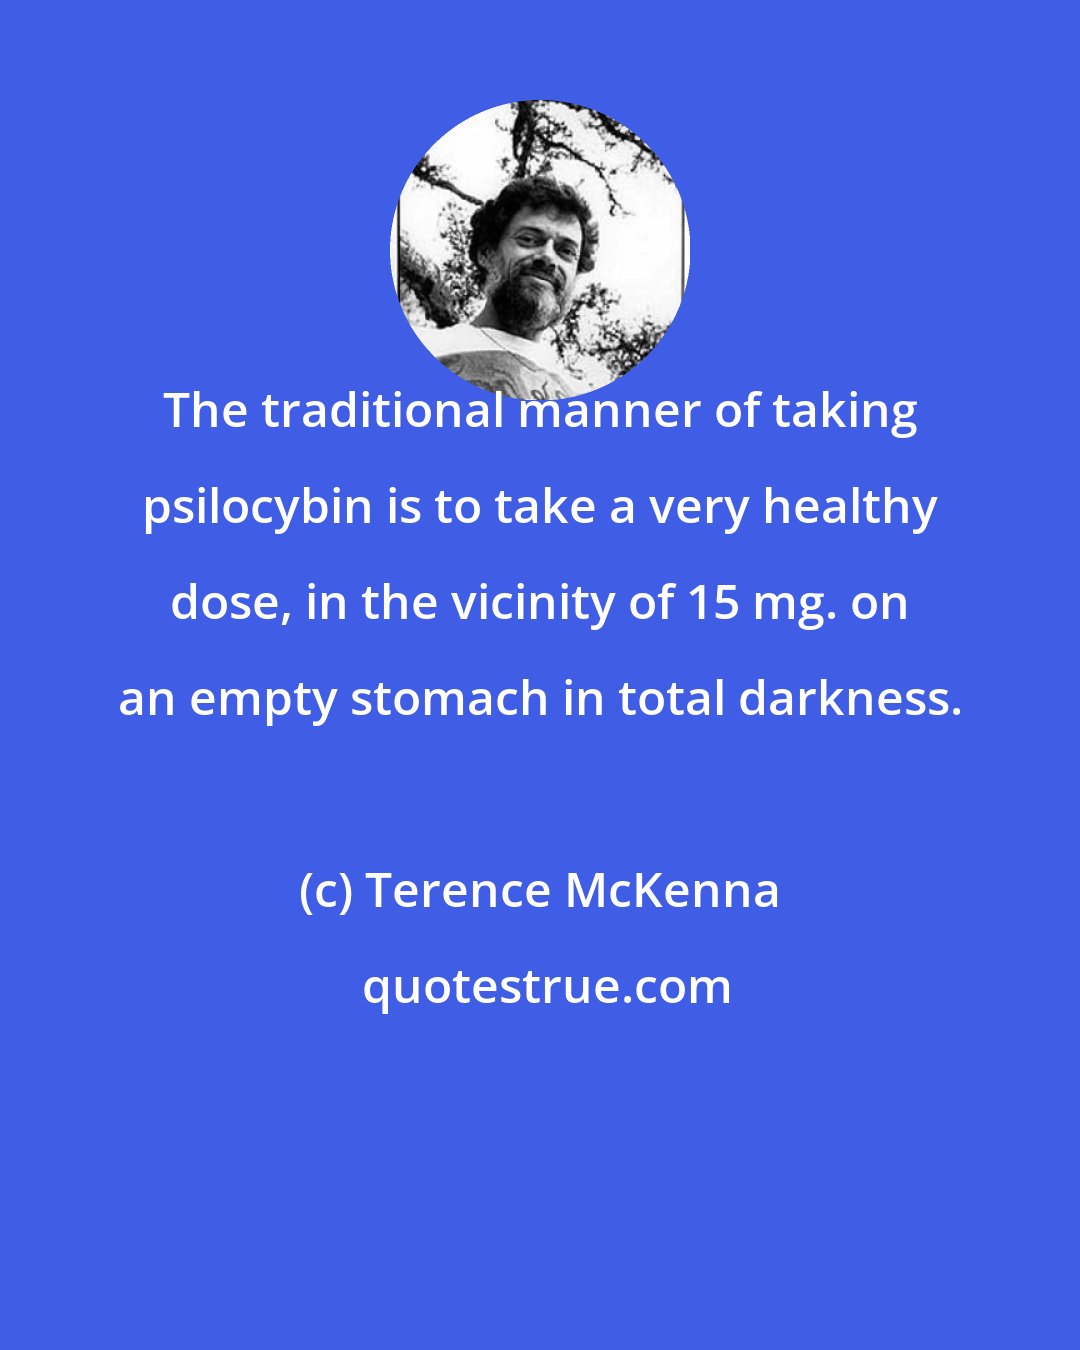 Terence McKenna: The traditional manner of taking psilocybin is to take a very healthy dose, in the vicinity of 15 mg. on an empty stomach in total darkness.